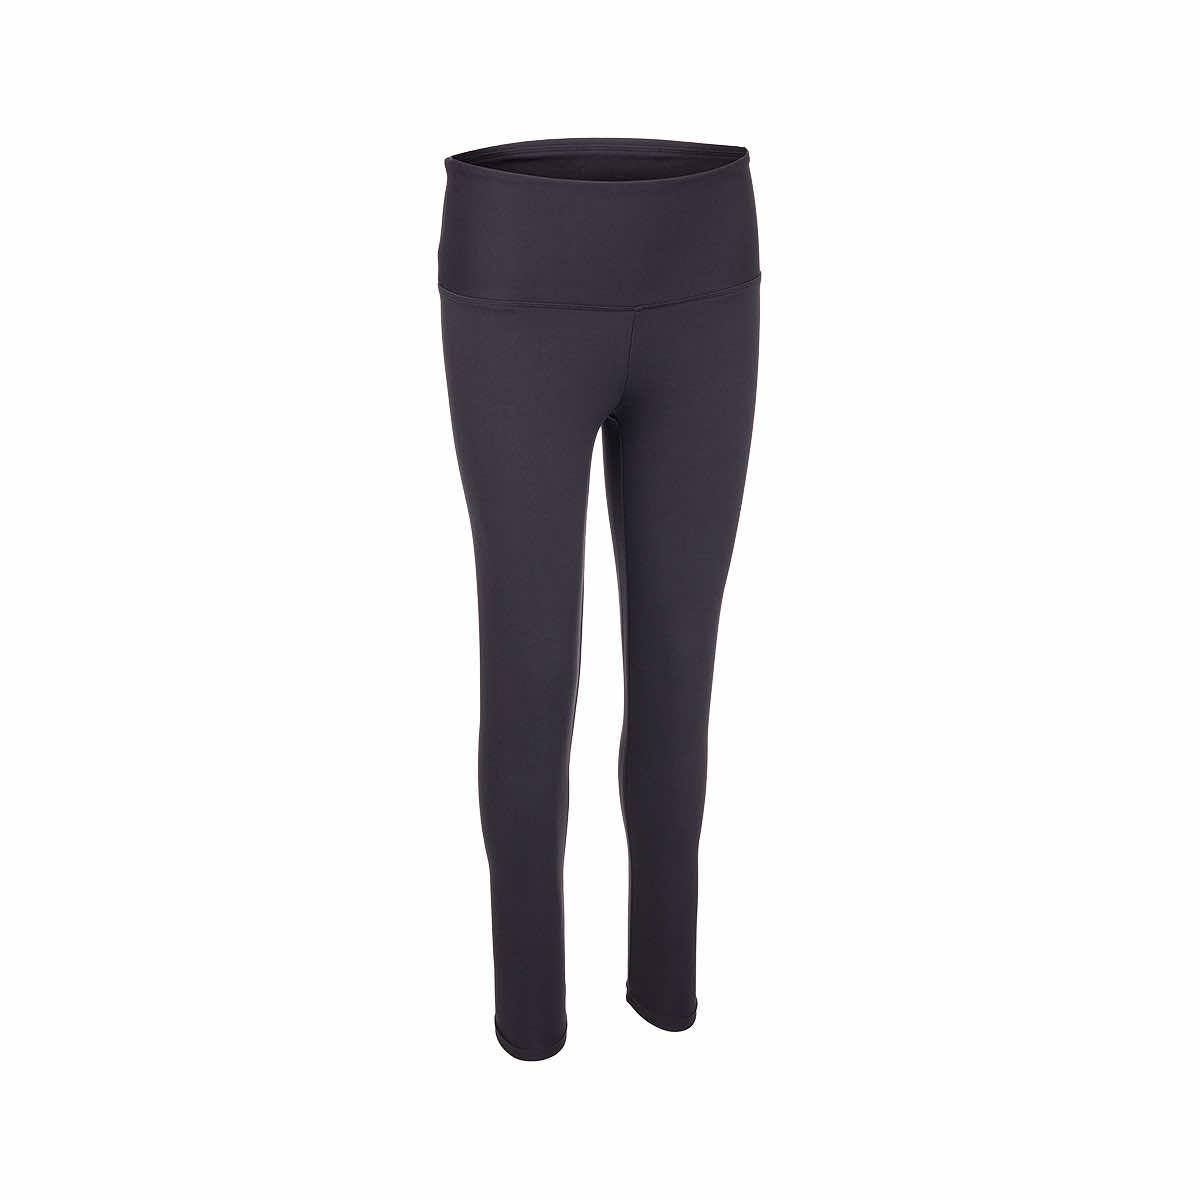 Navy Lululemon leggings with side ruffle details and pockets